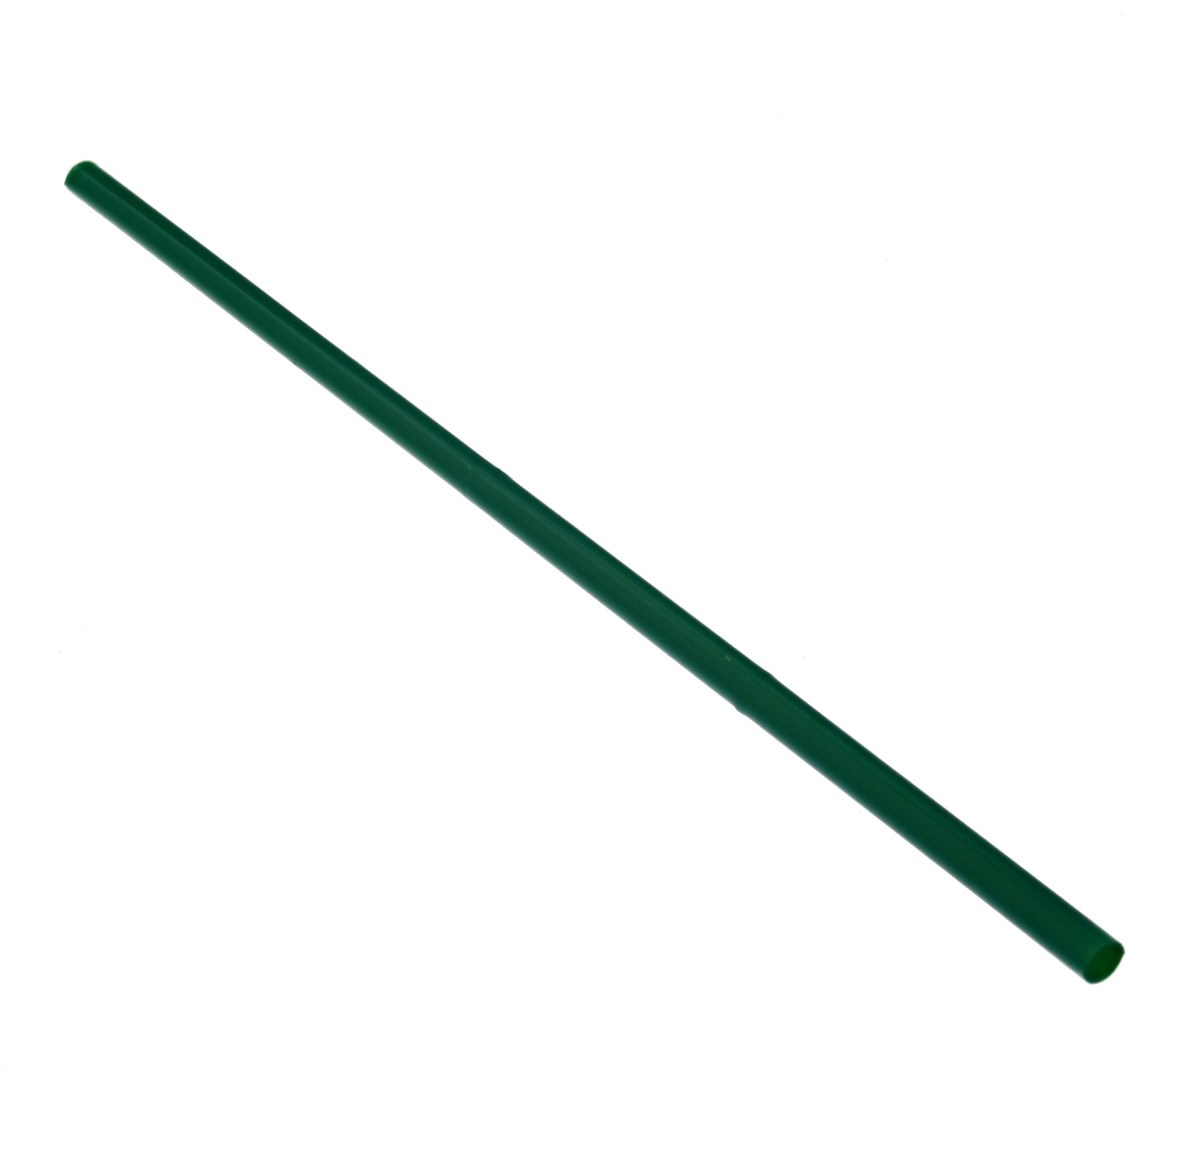 Pla Compostable Green Straight Drinking Straw